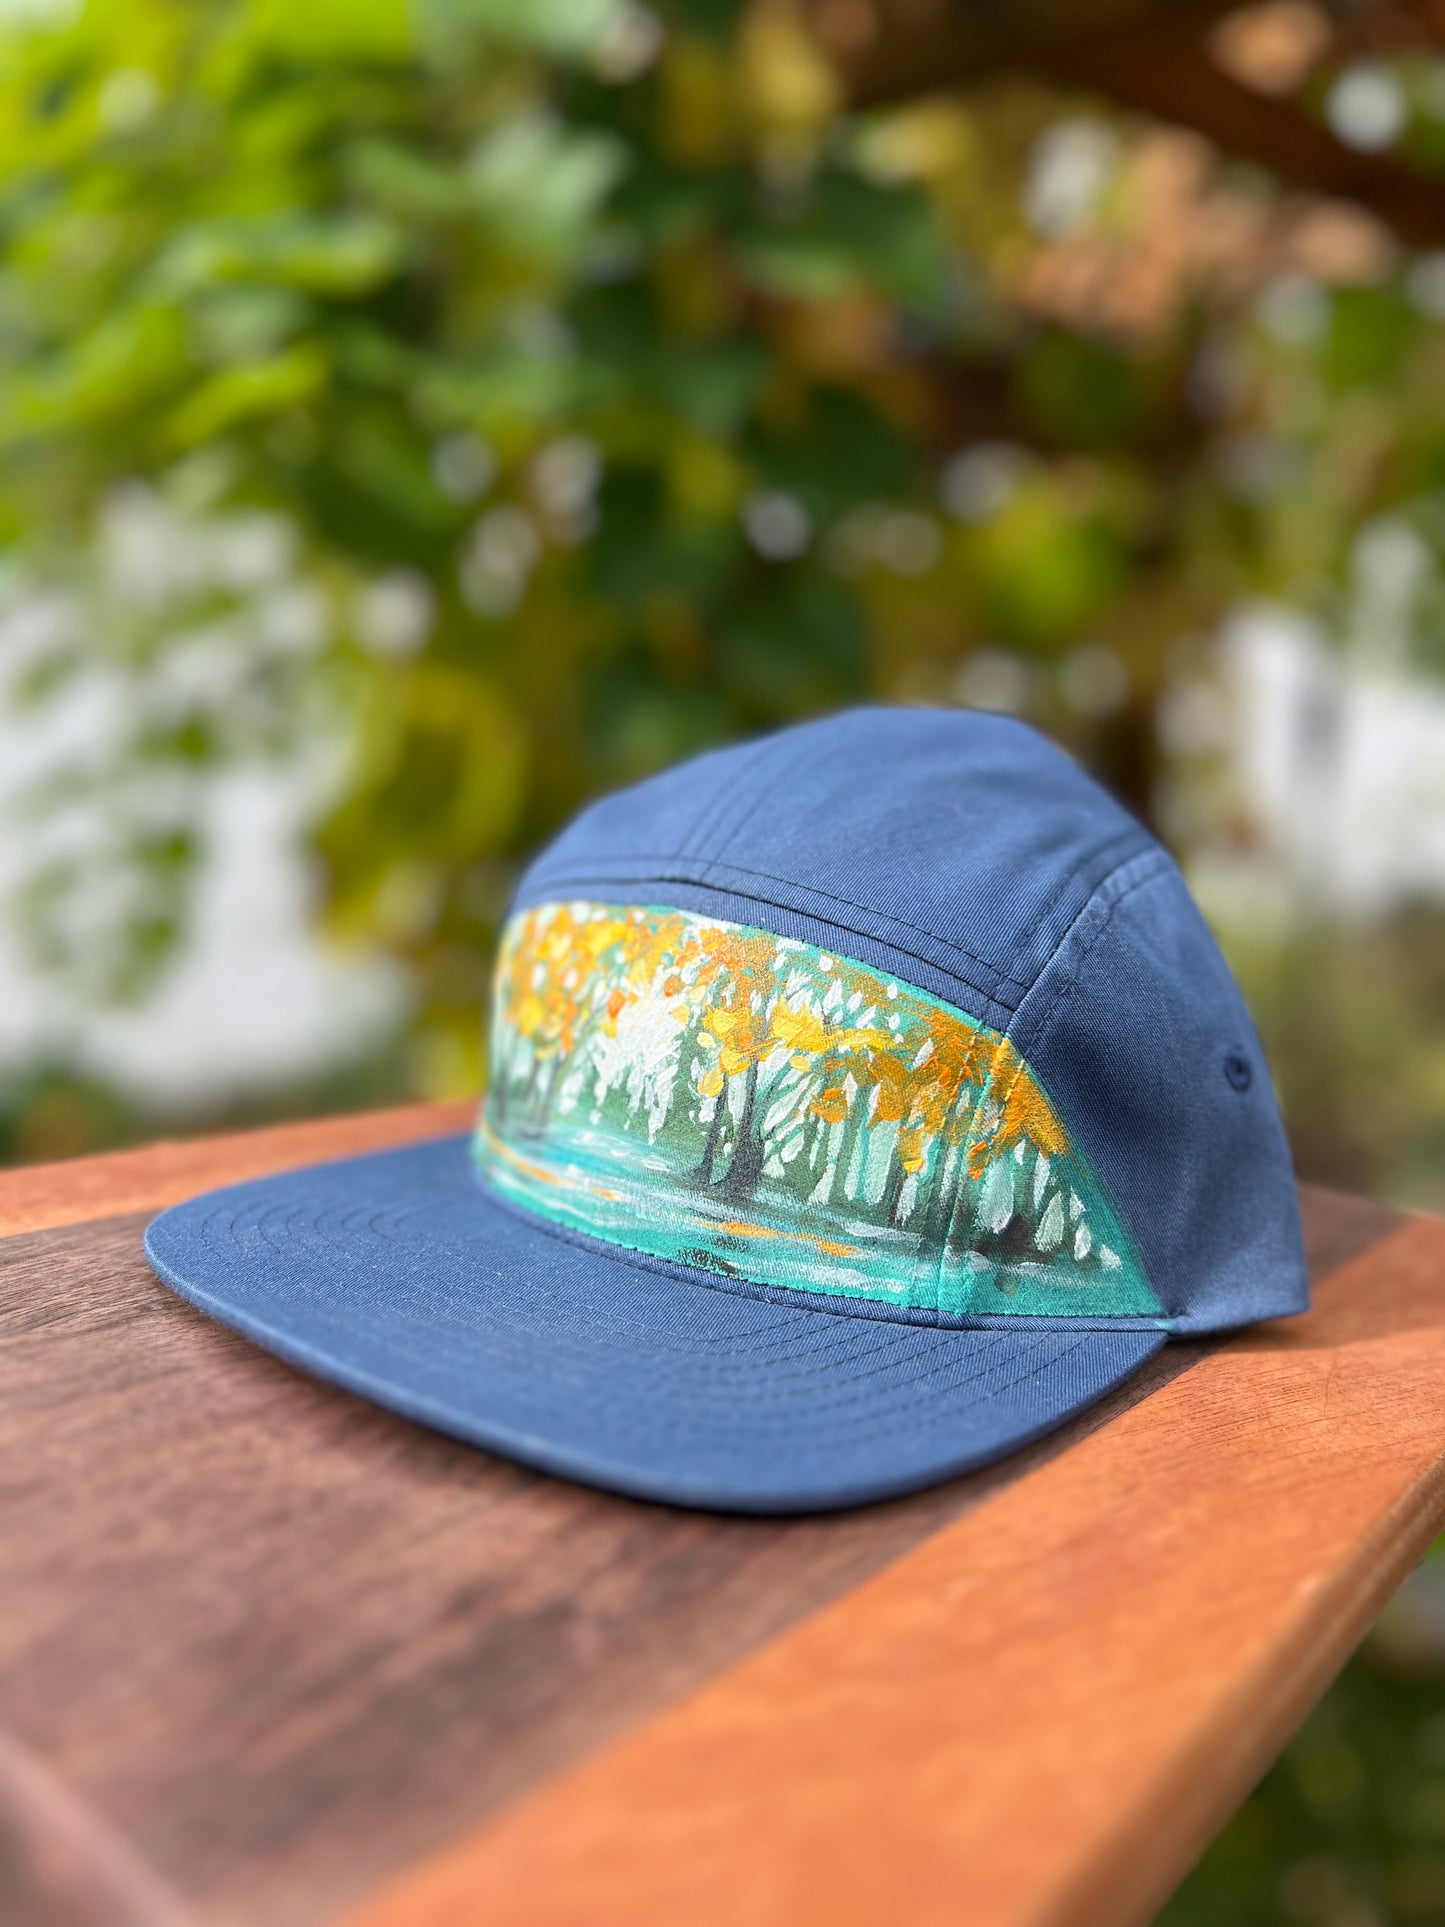 "Peaceful Way" Hand Painted Hat